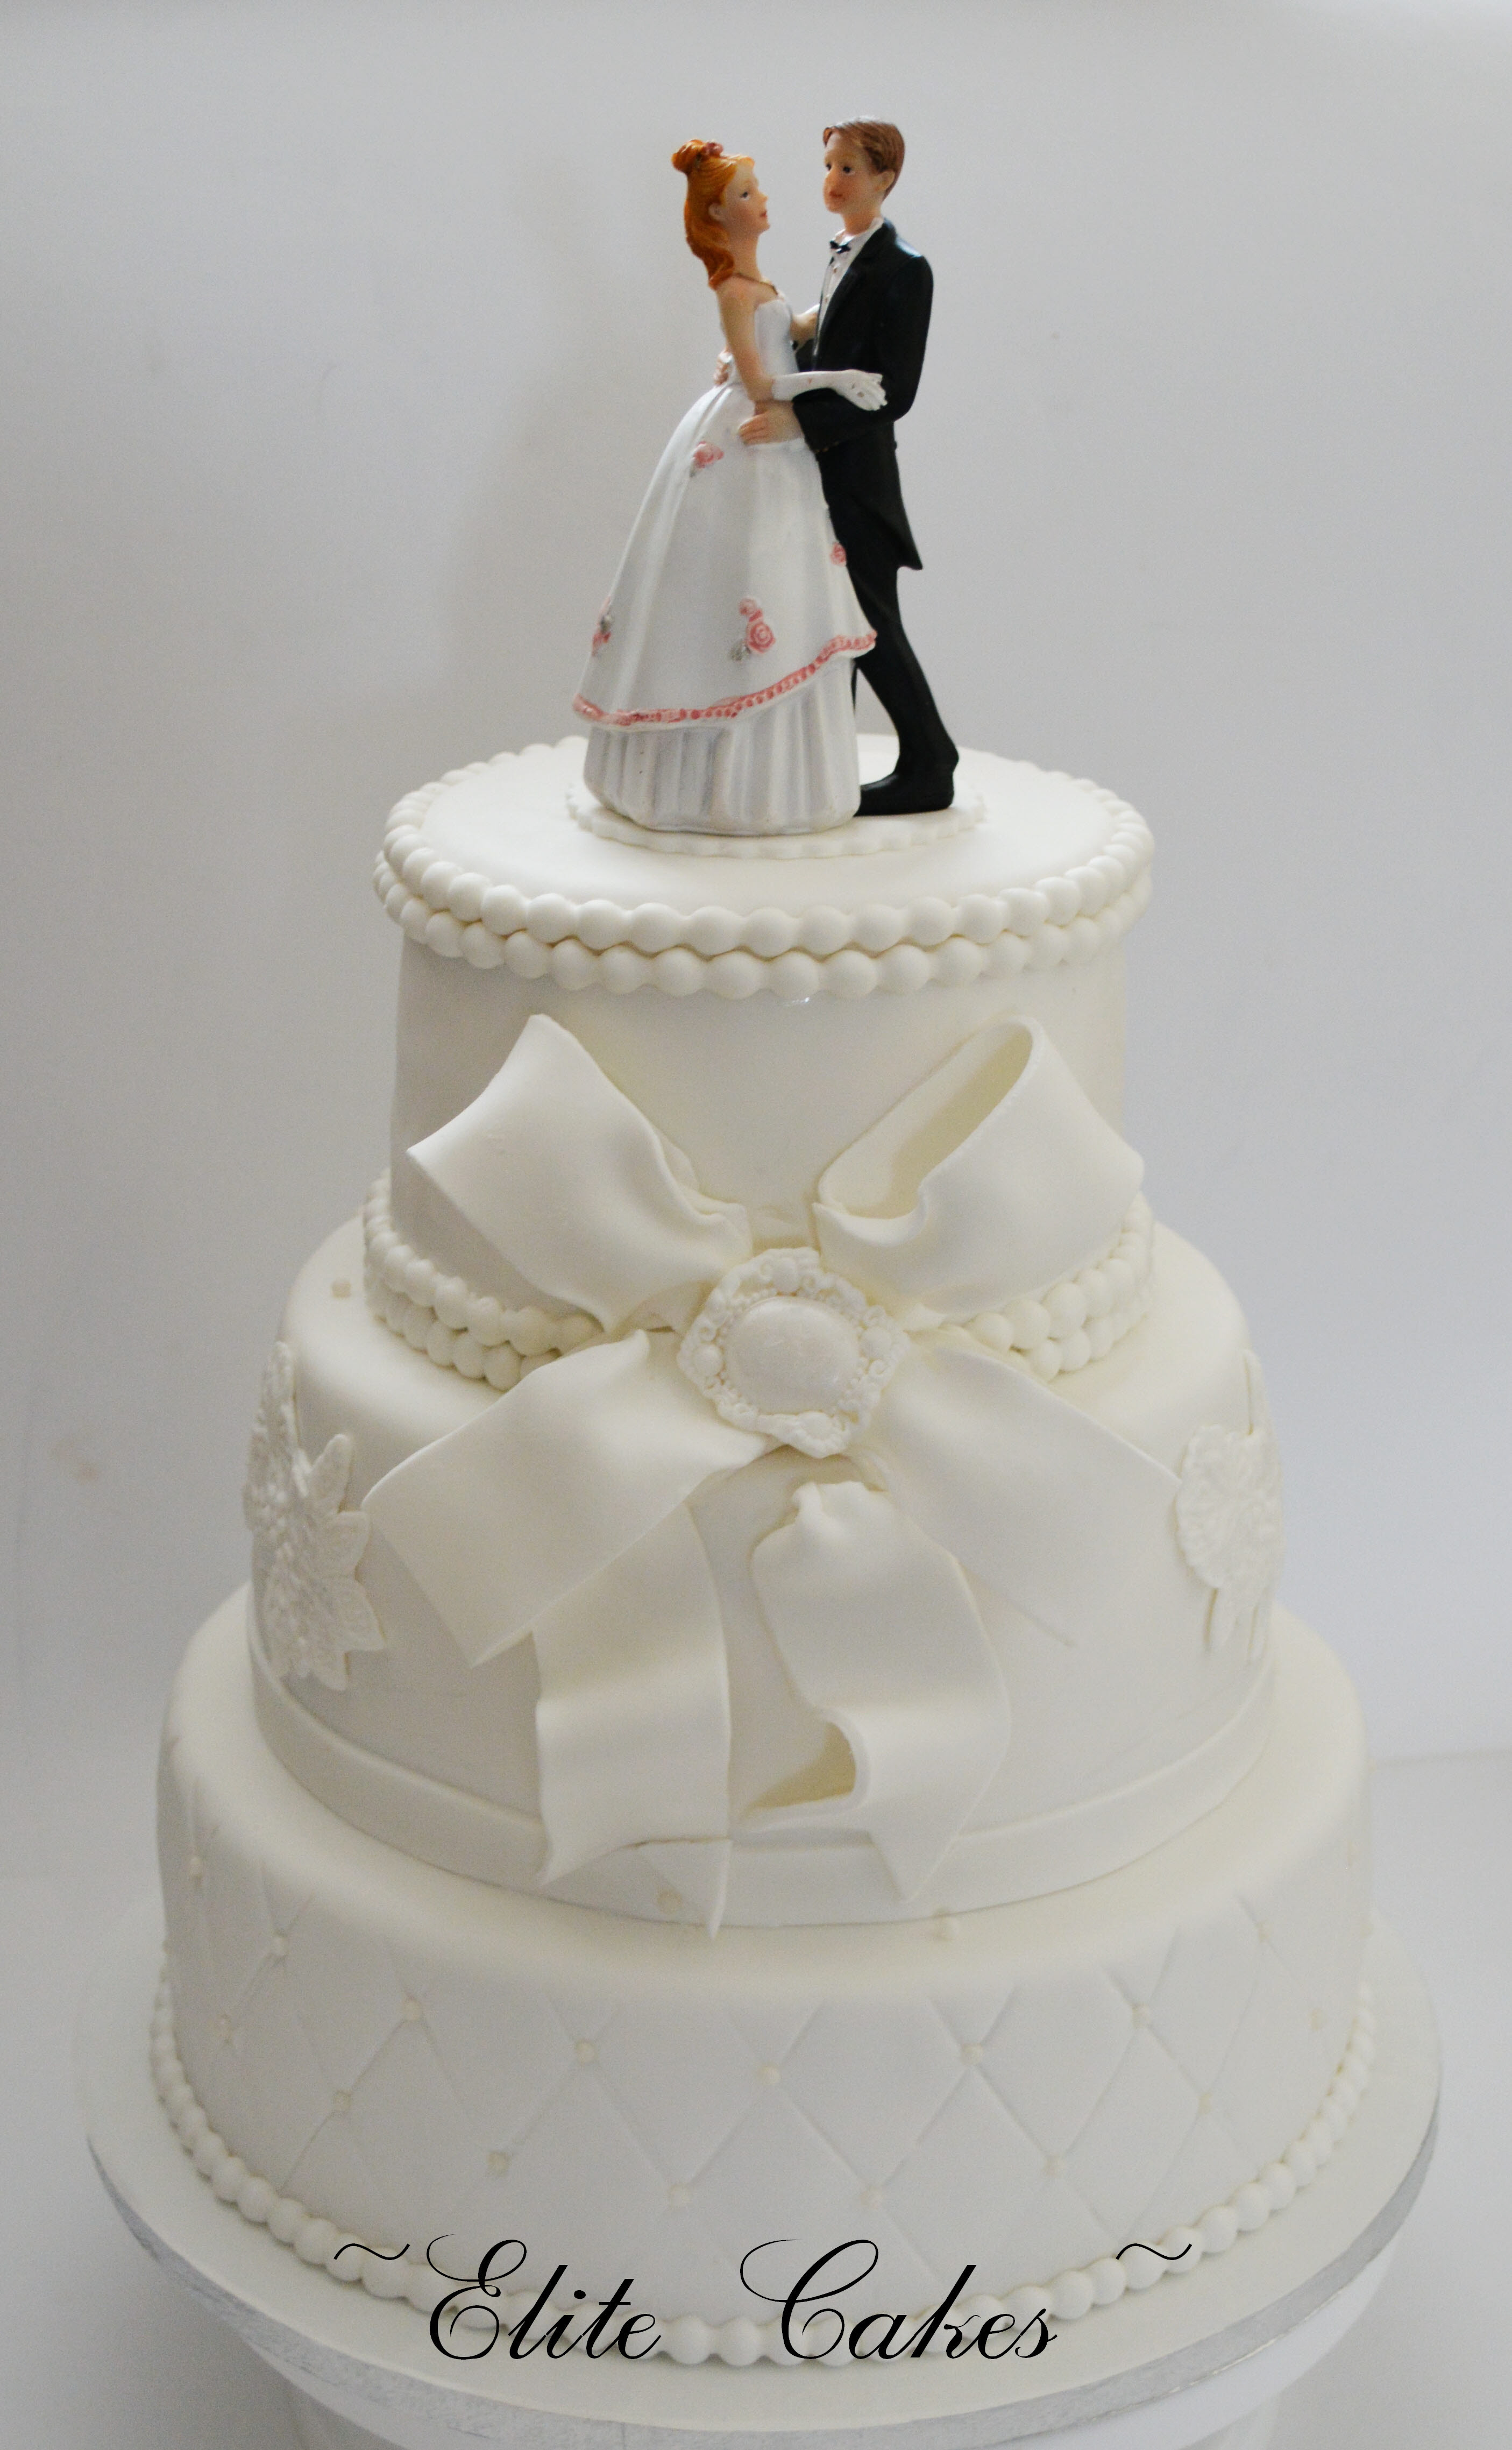 Wedding Cakes On Line the 20 Best Ideas for order Your Wedding Cake Line Elite Cakes Boutique